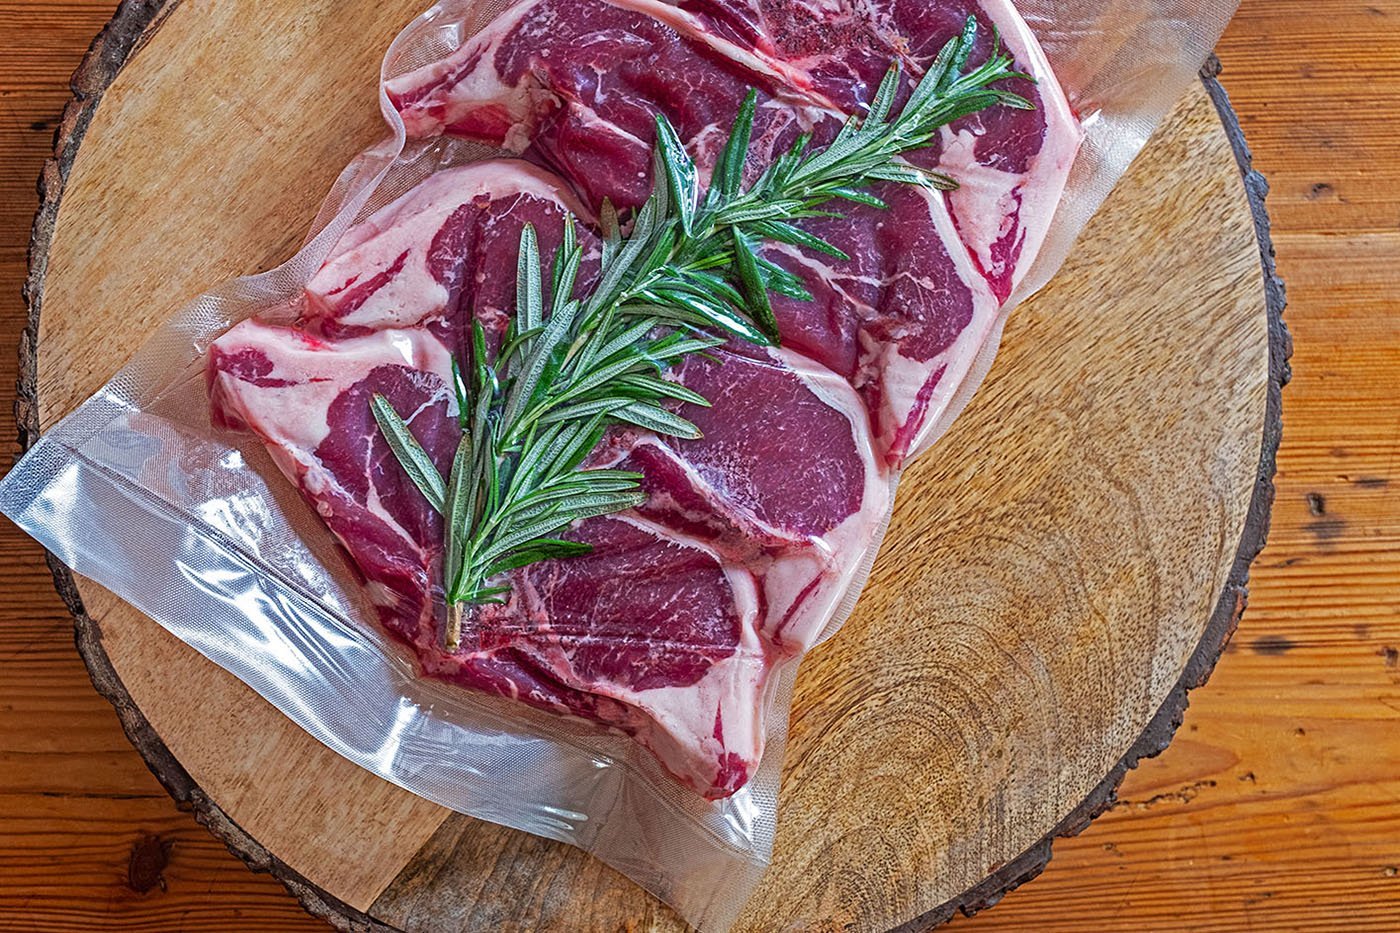 Slow Cooker + Sous Vide = Fun for Hours - Food & Nutrition Magazine